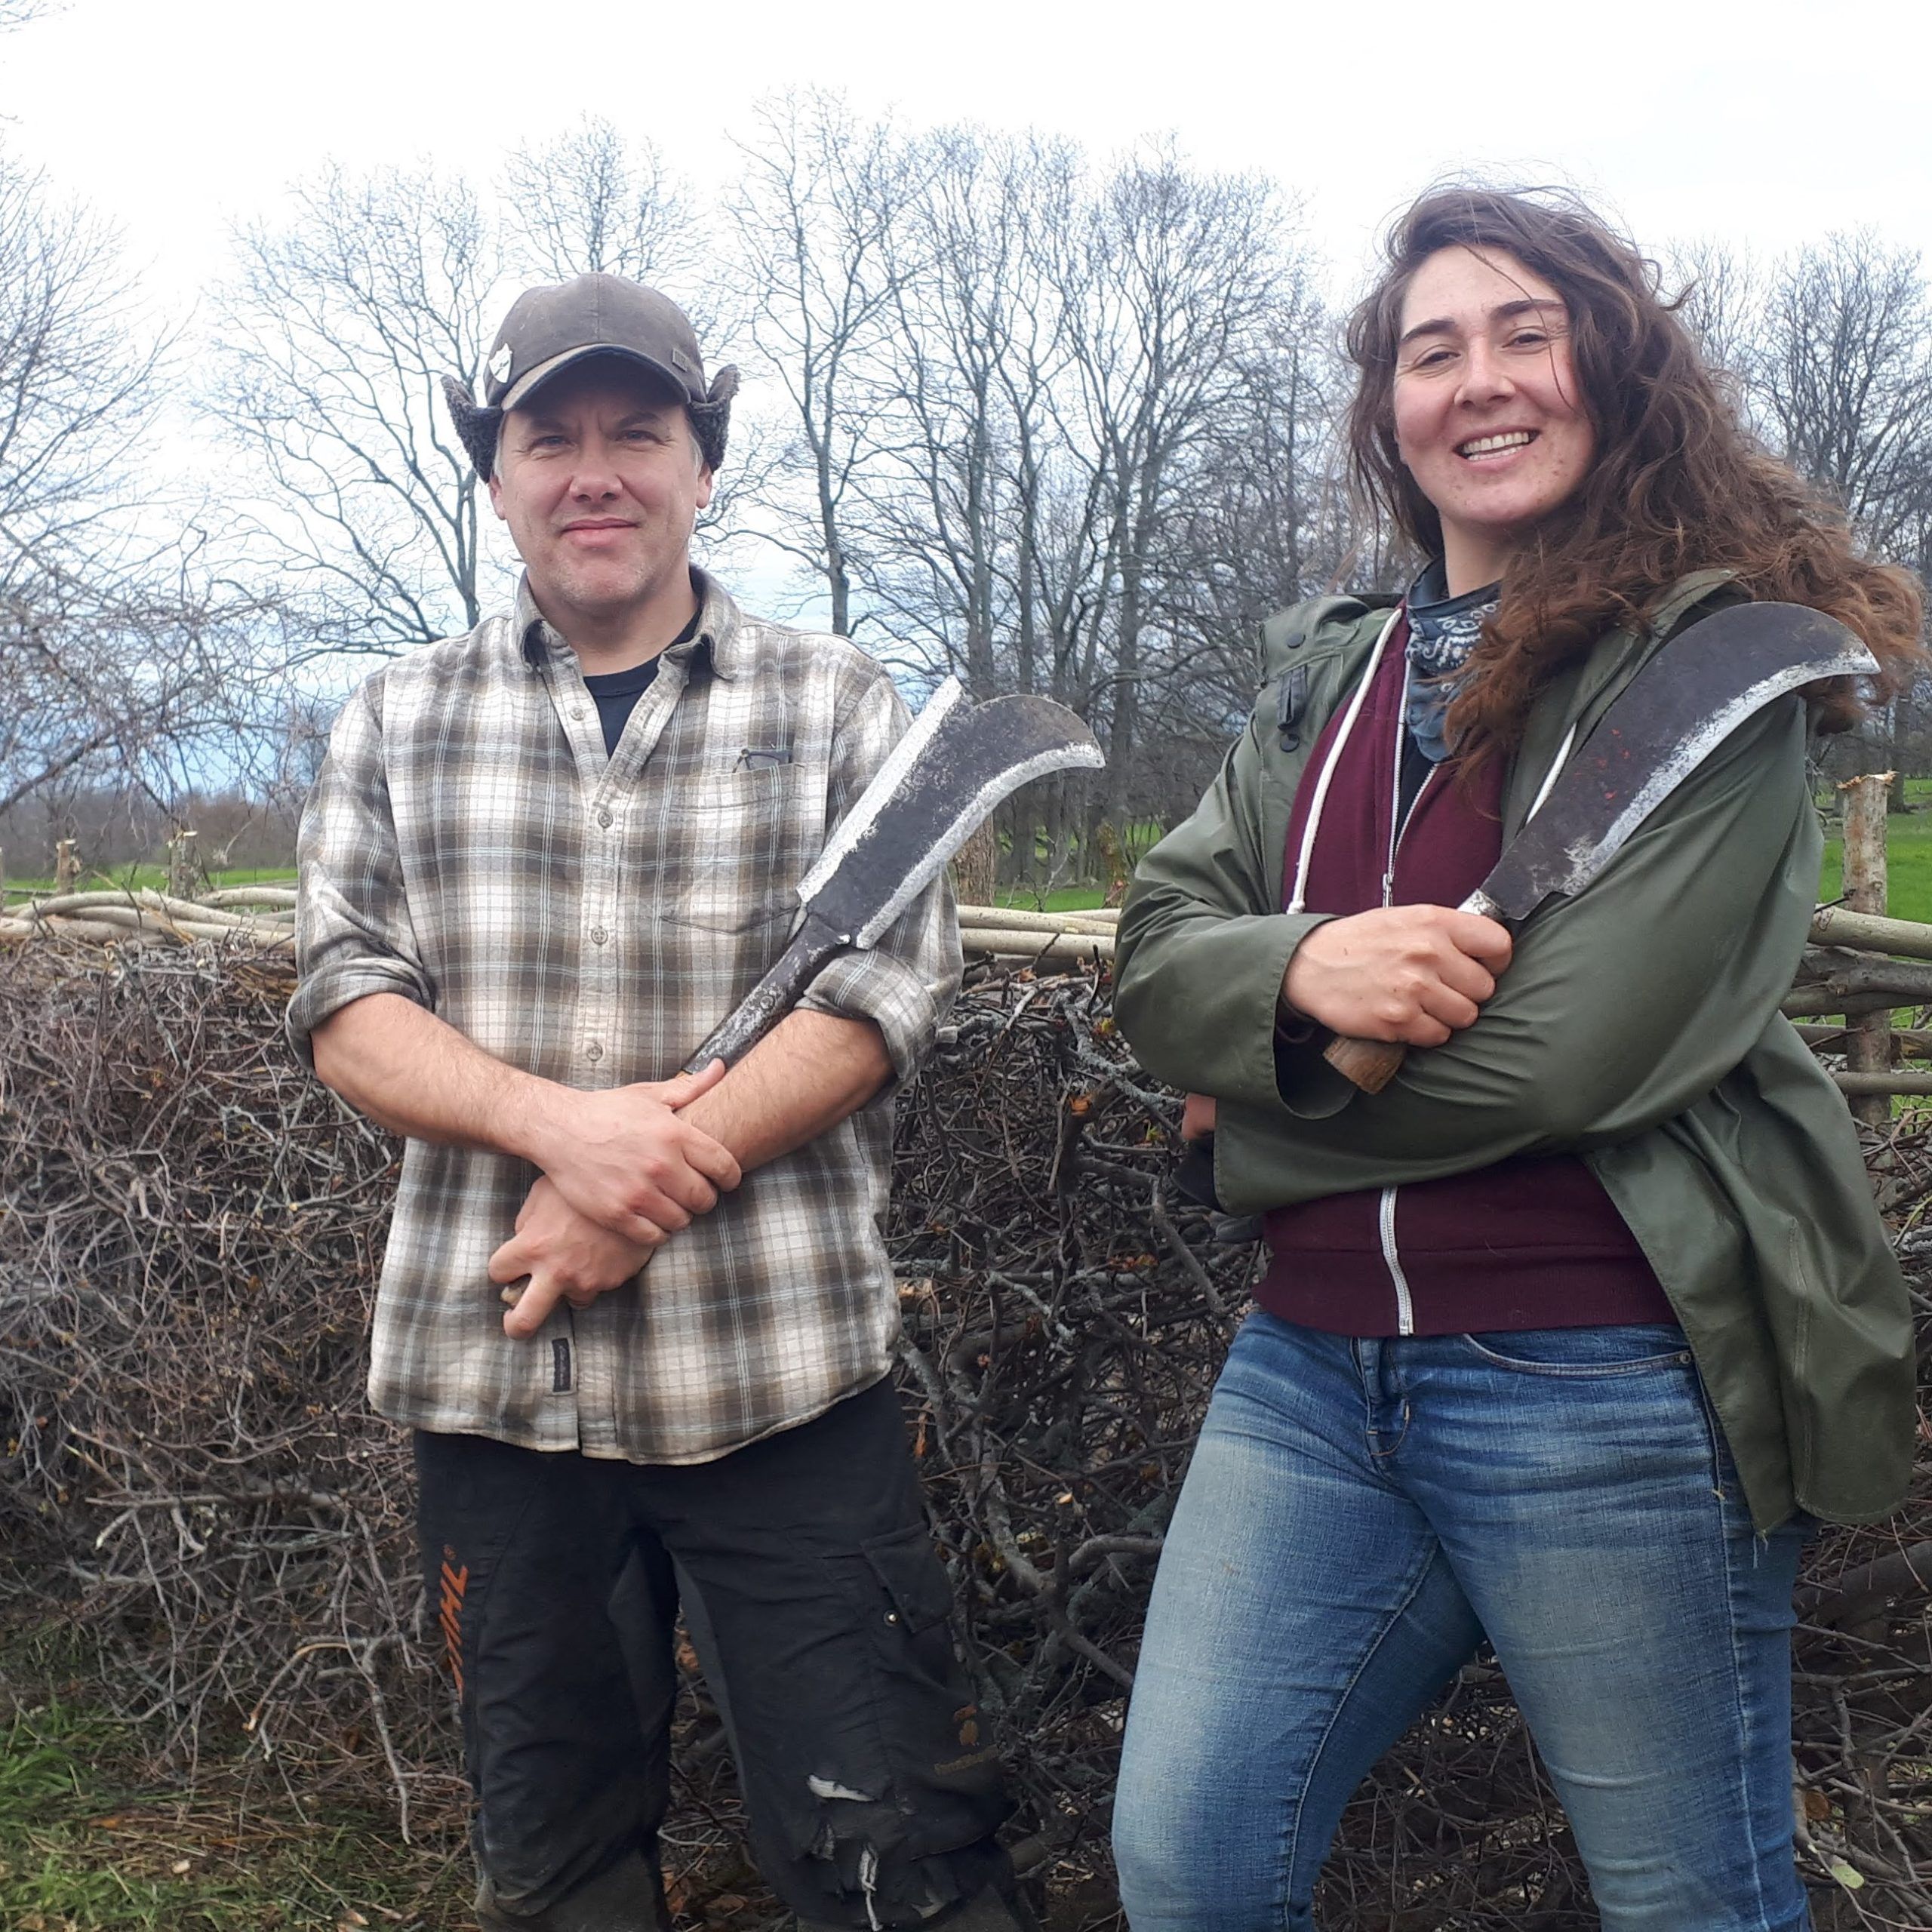 Two people stand posed with machetes smiling with a hedgerow in the background